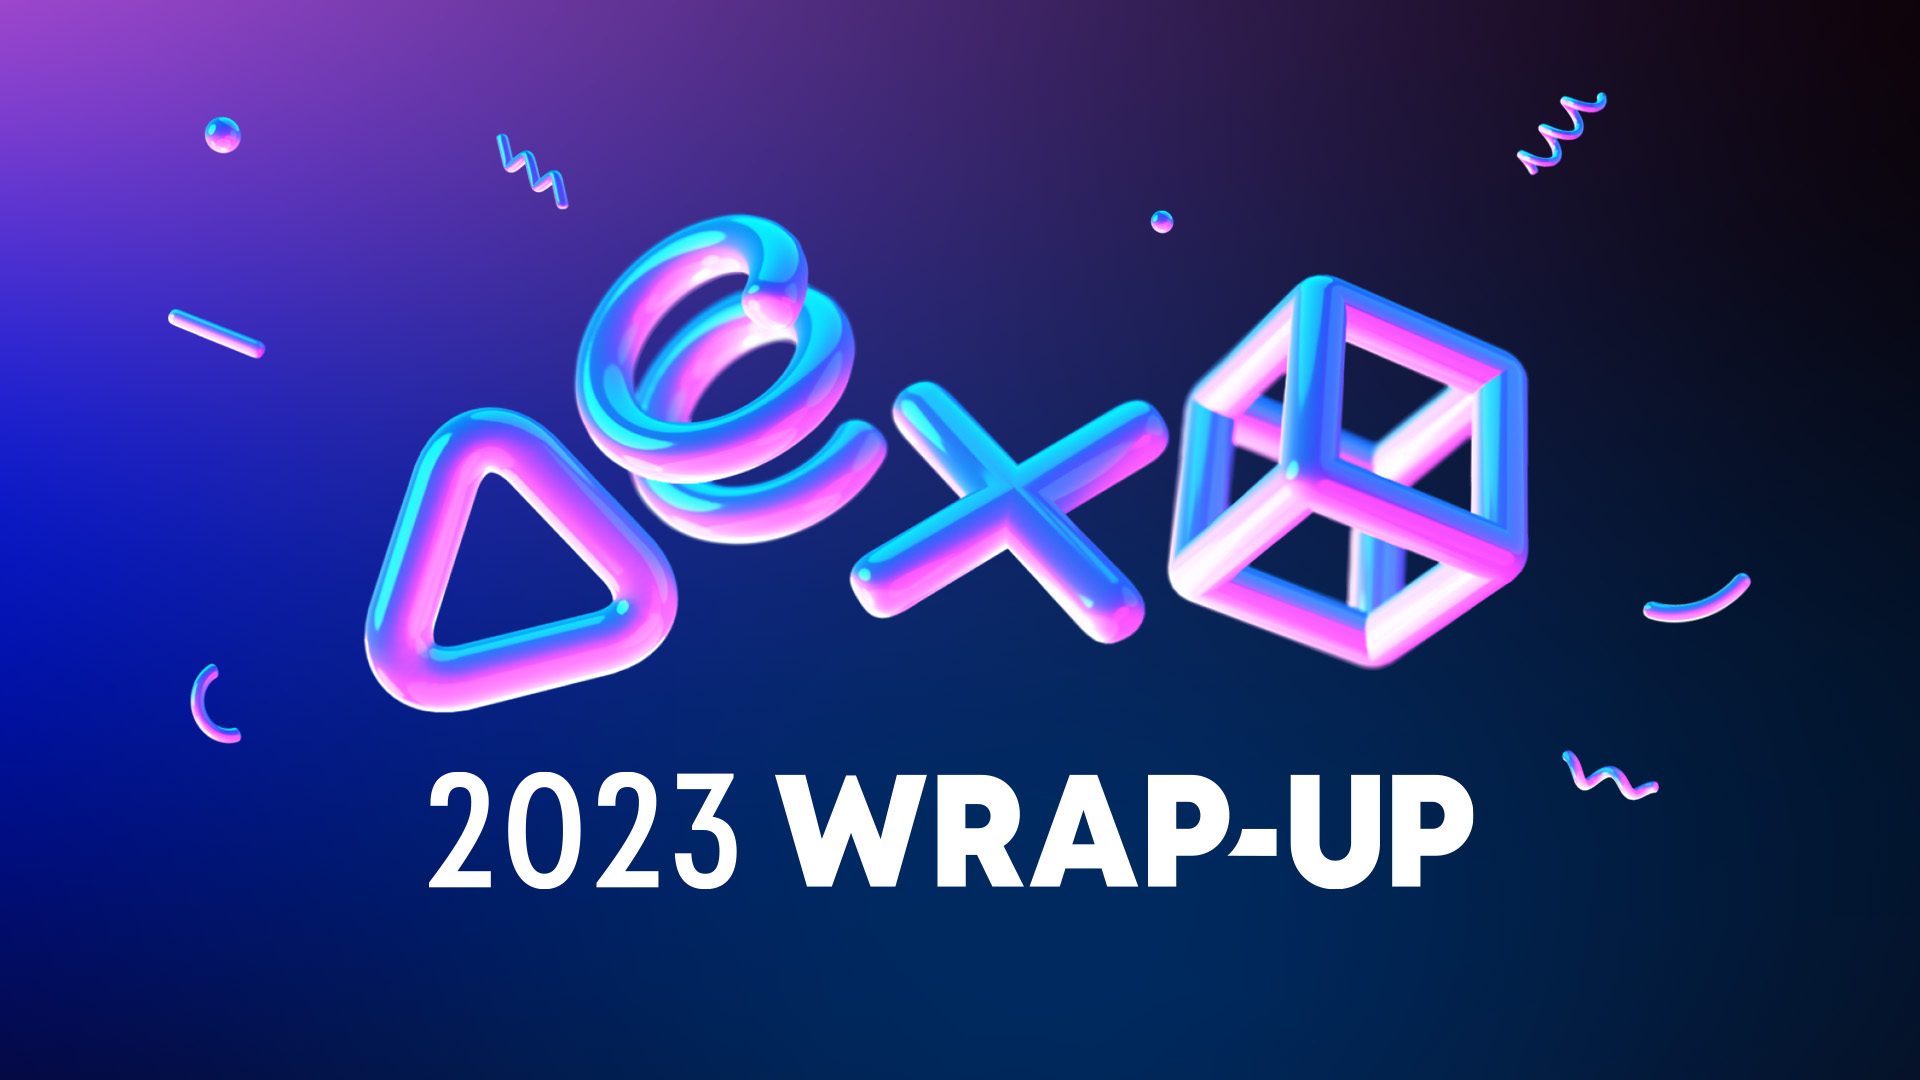 PlayStation 2023 Wrap-Up launches today, with a personalized look at your 2023 gaming achievements – PlayStation.Blog